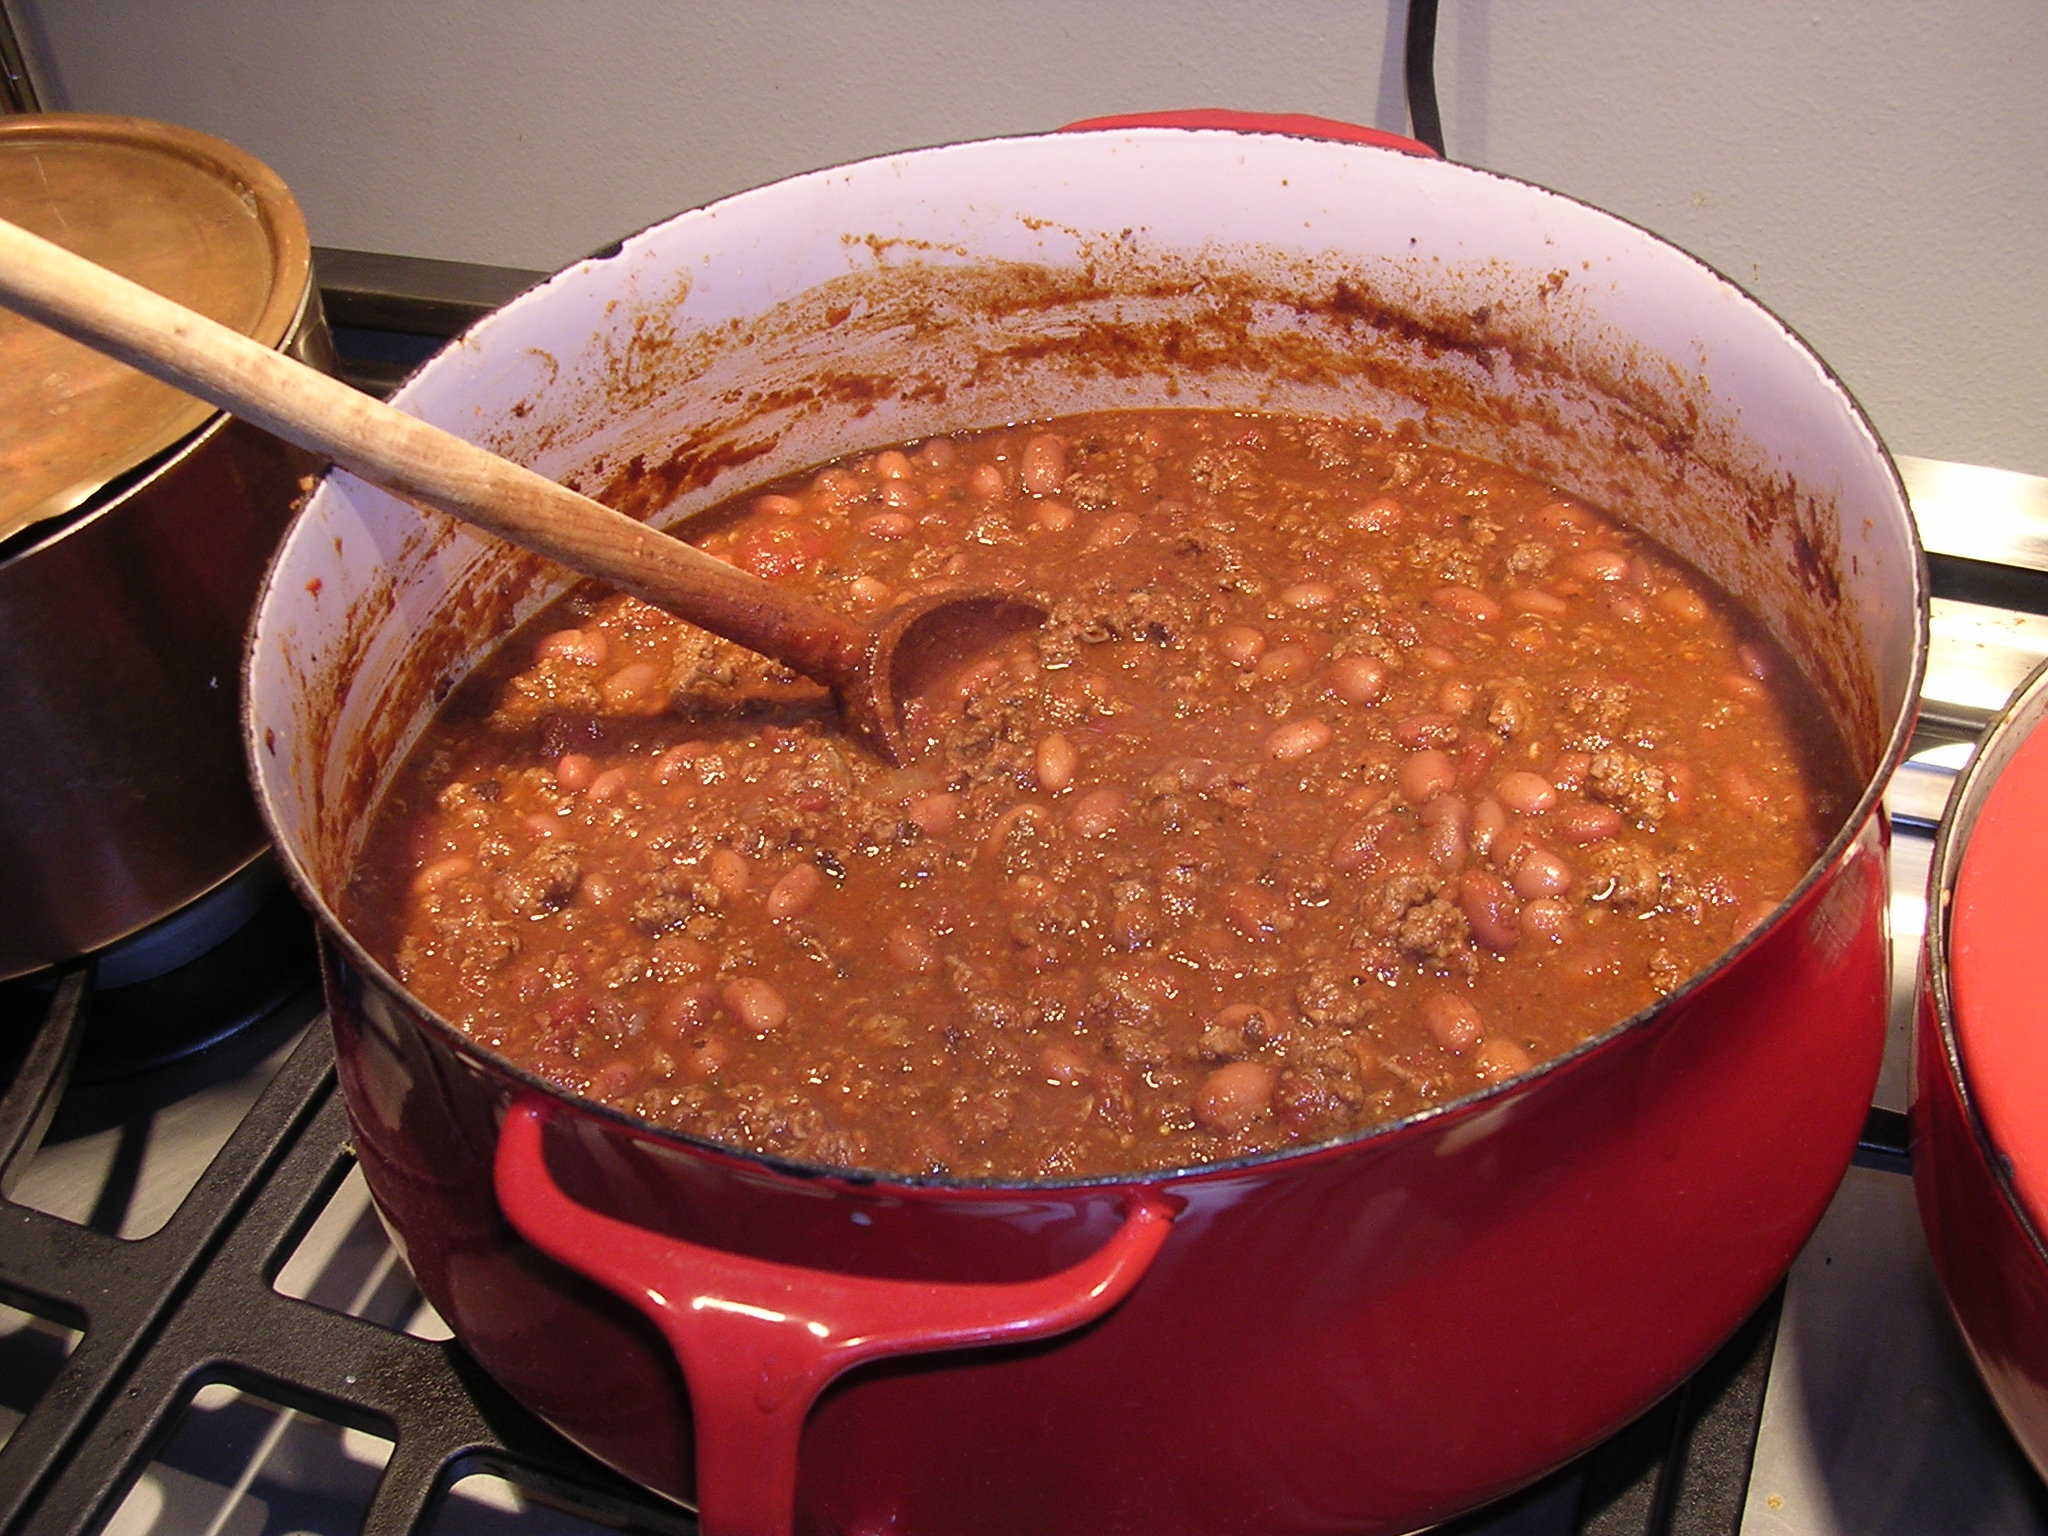 Kevin's Homemade Chili with Beer and Beans